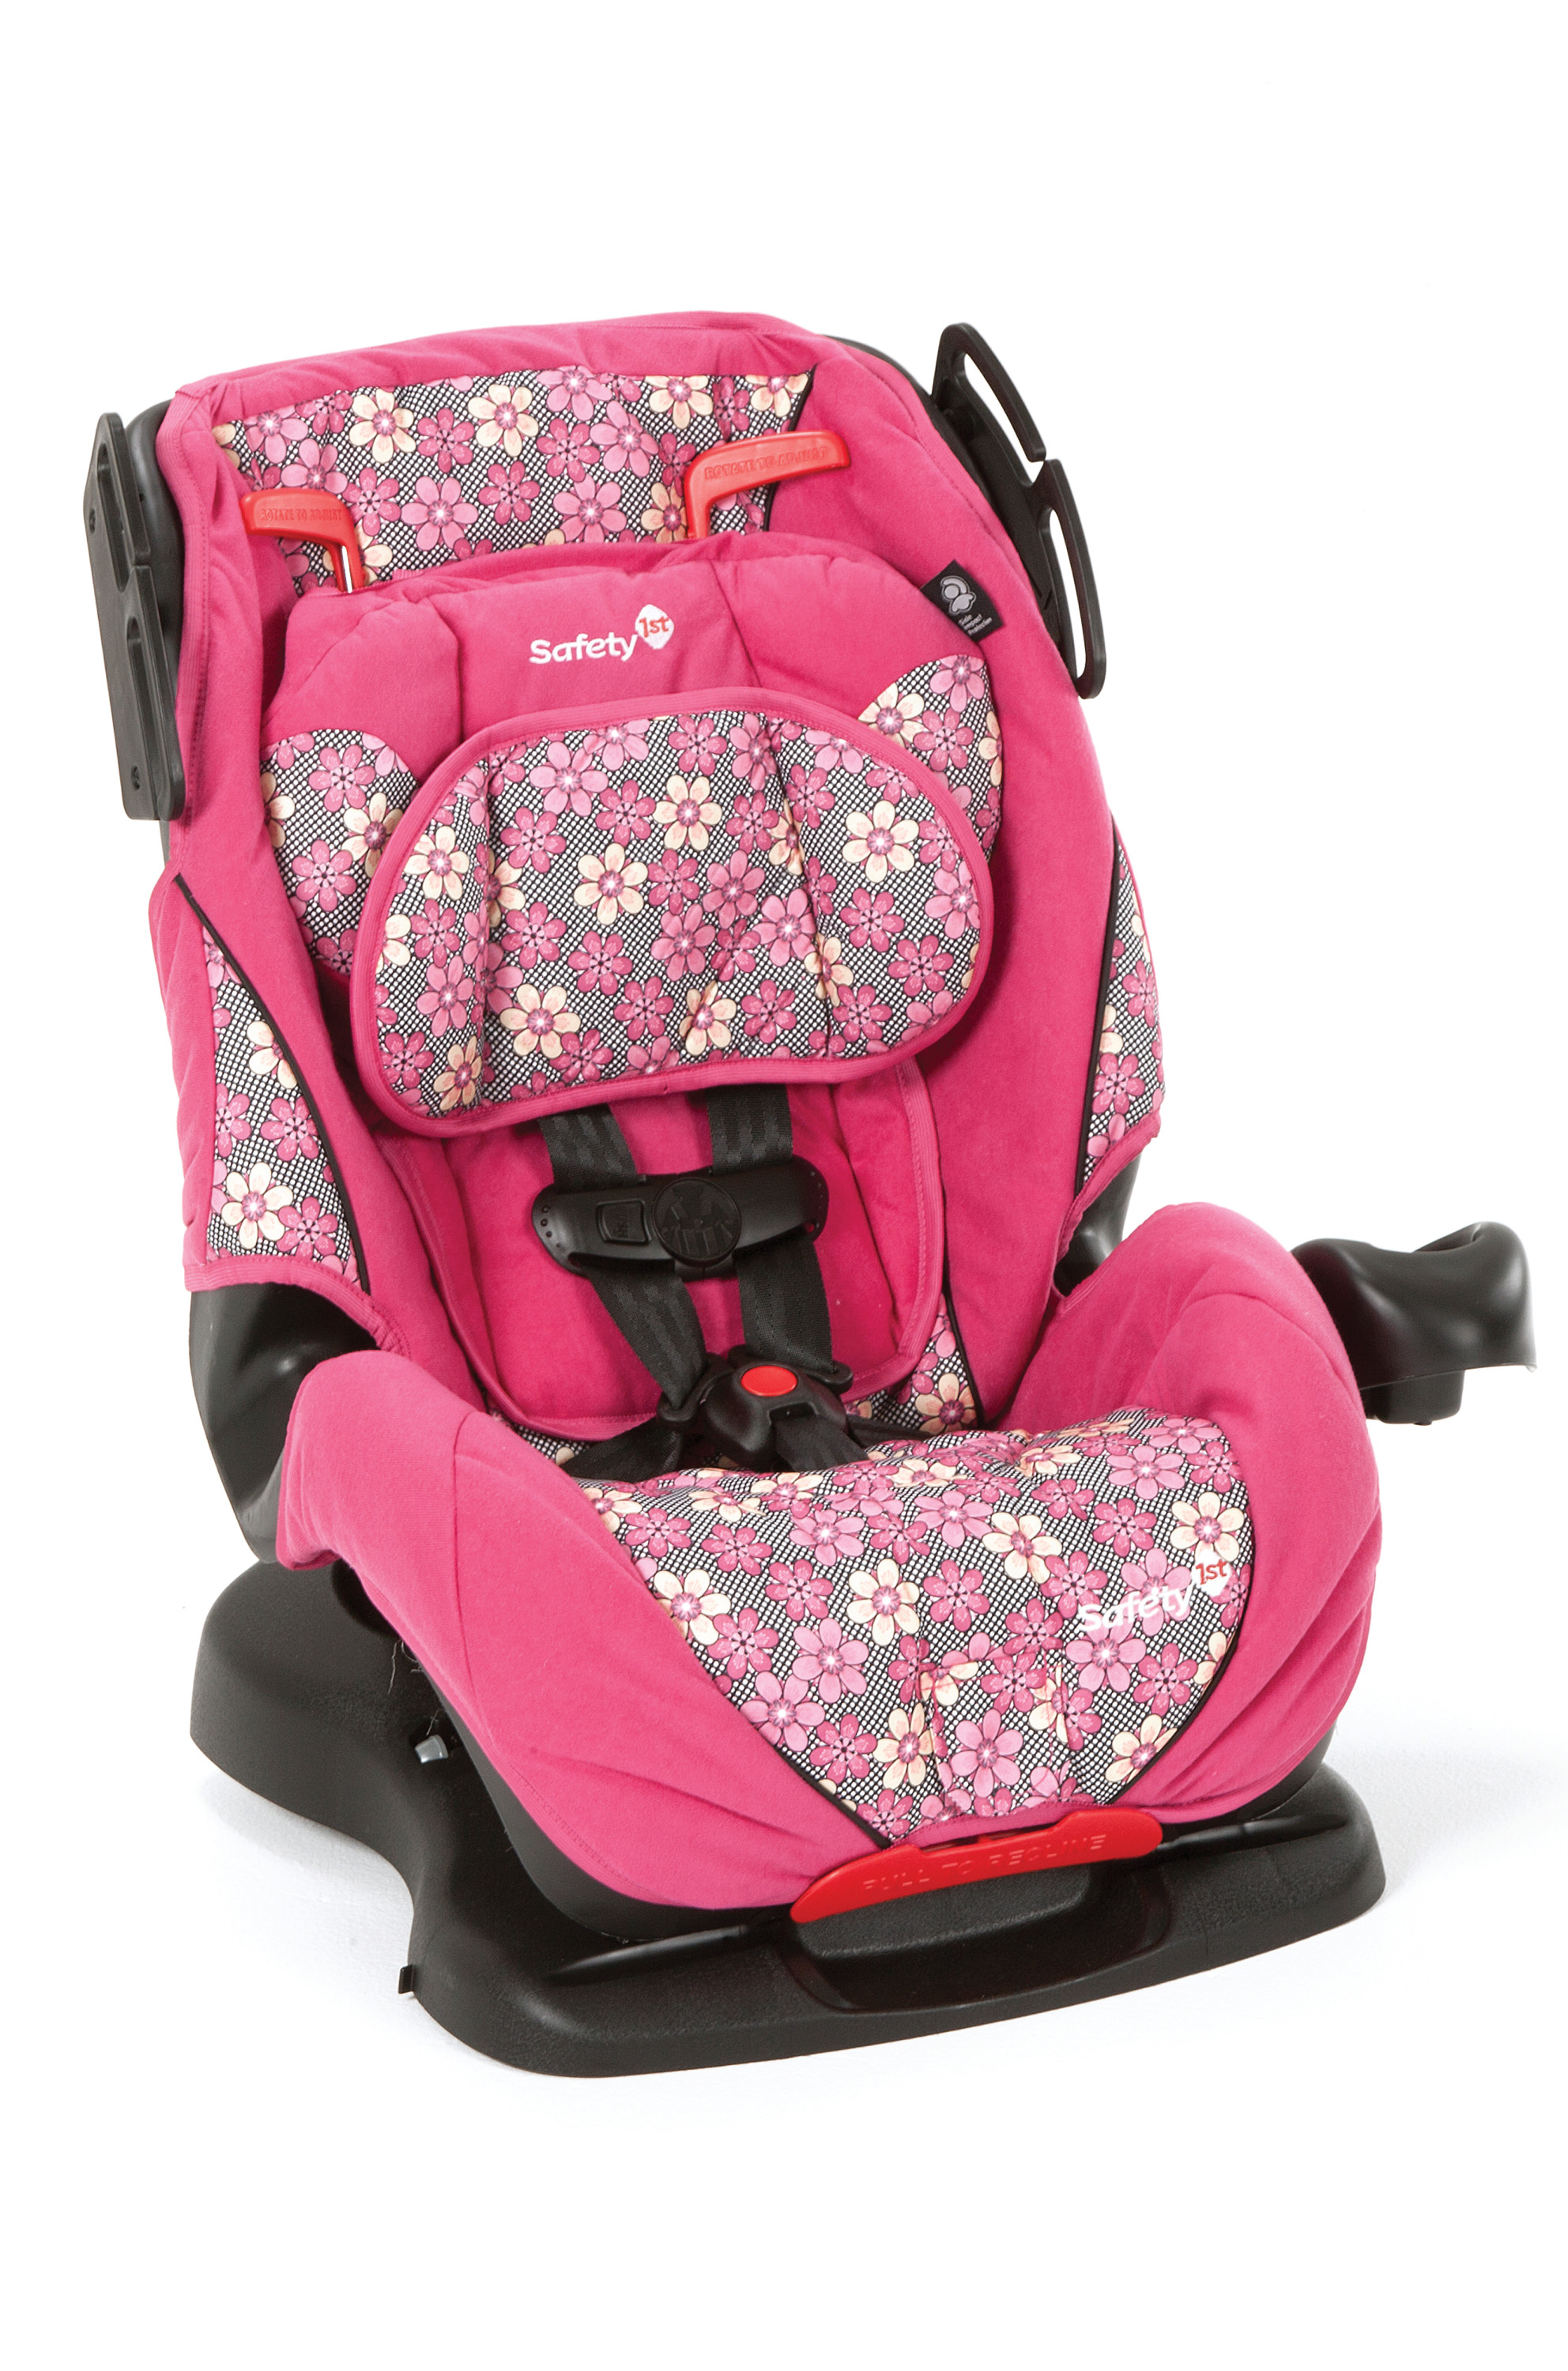 Safety 1ˢᵗ All-in-One Sport Convertible Car Seat, Giana - image 1 of 2